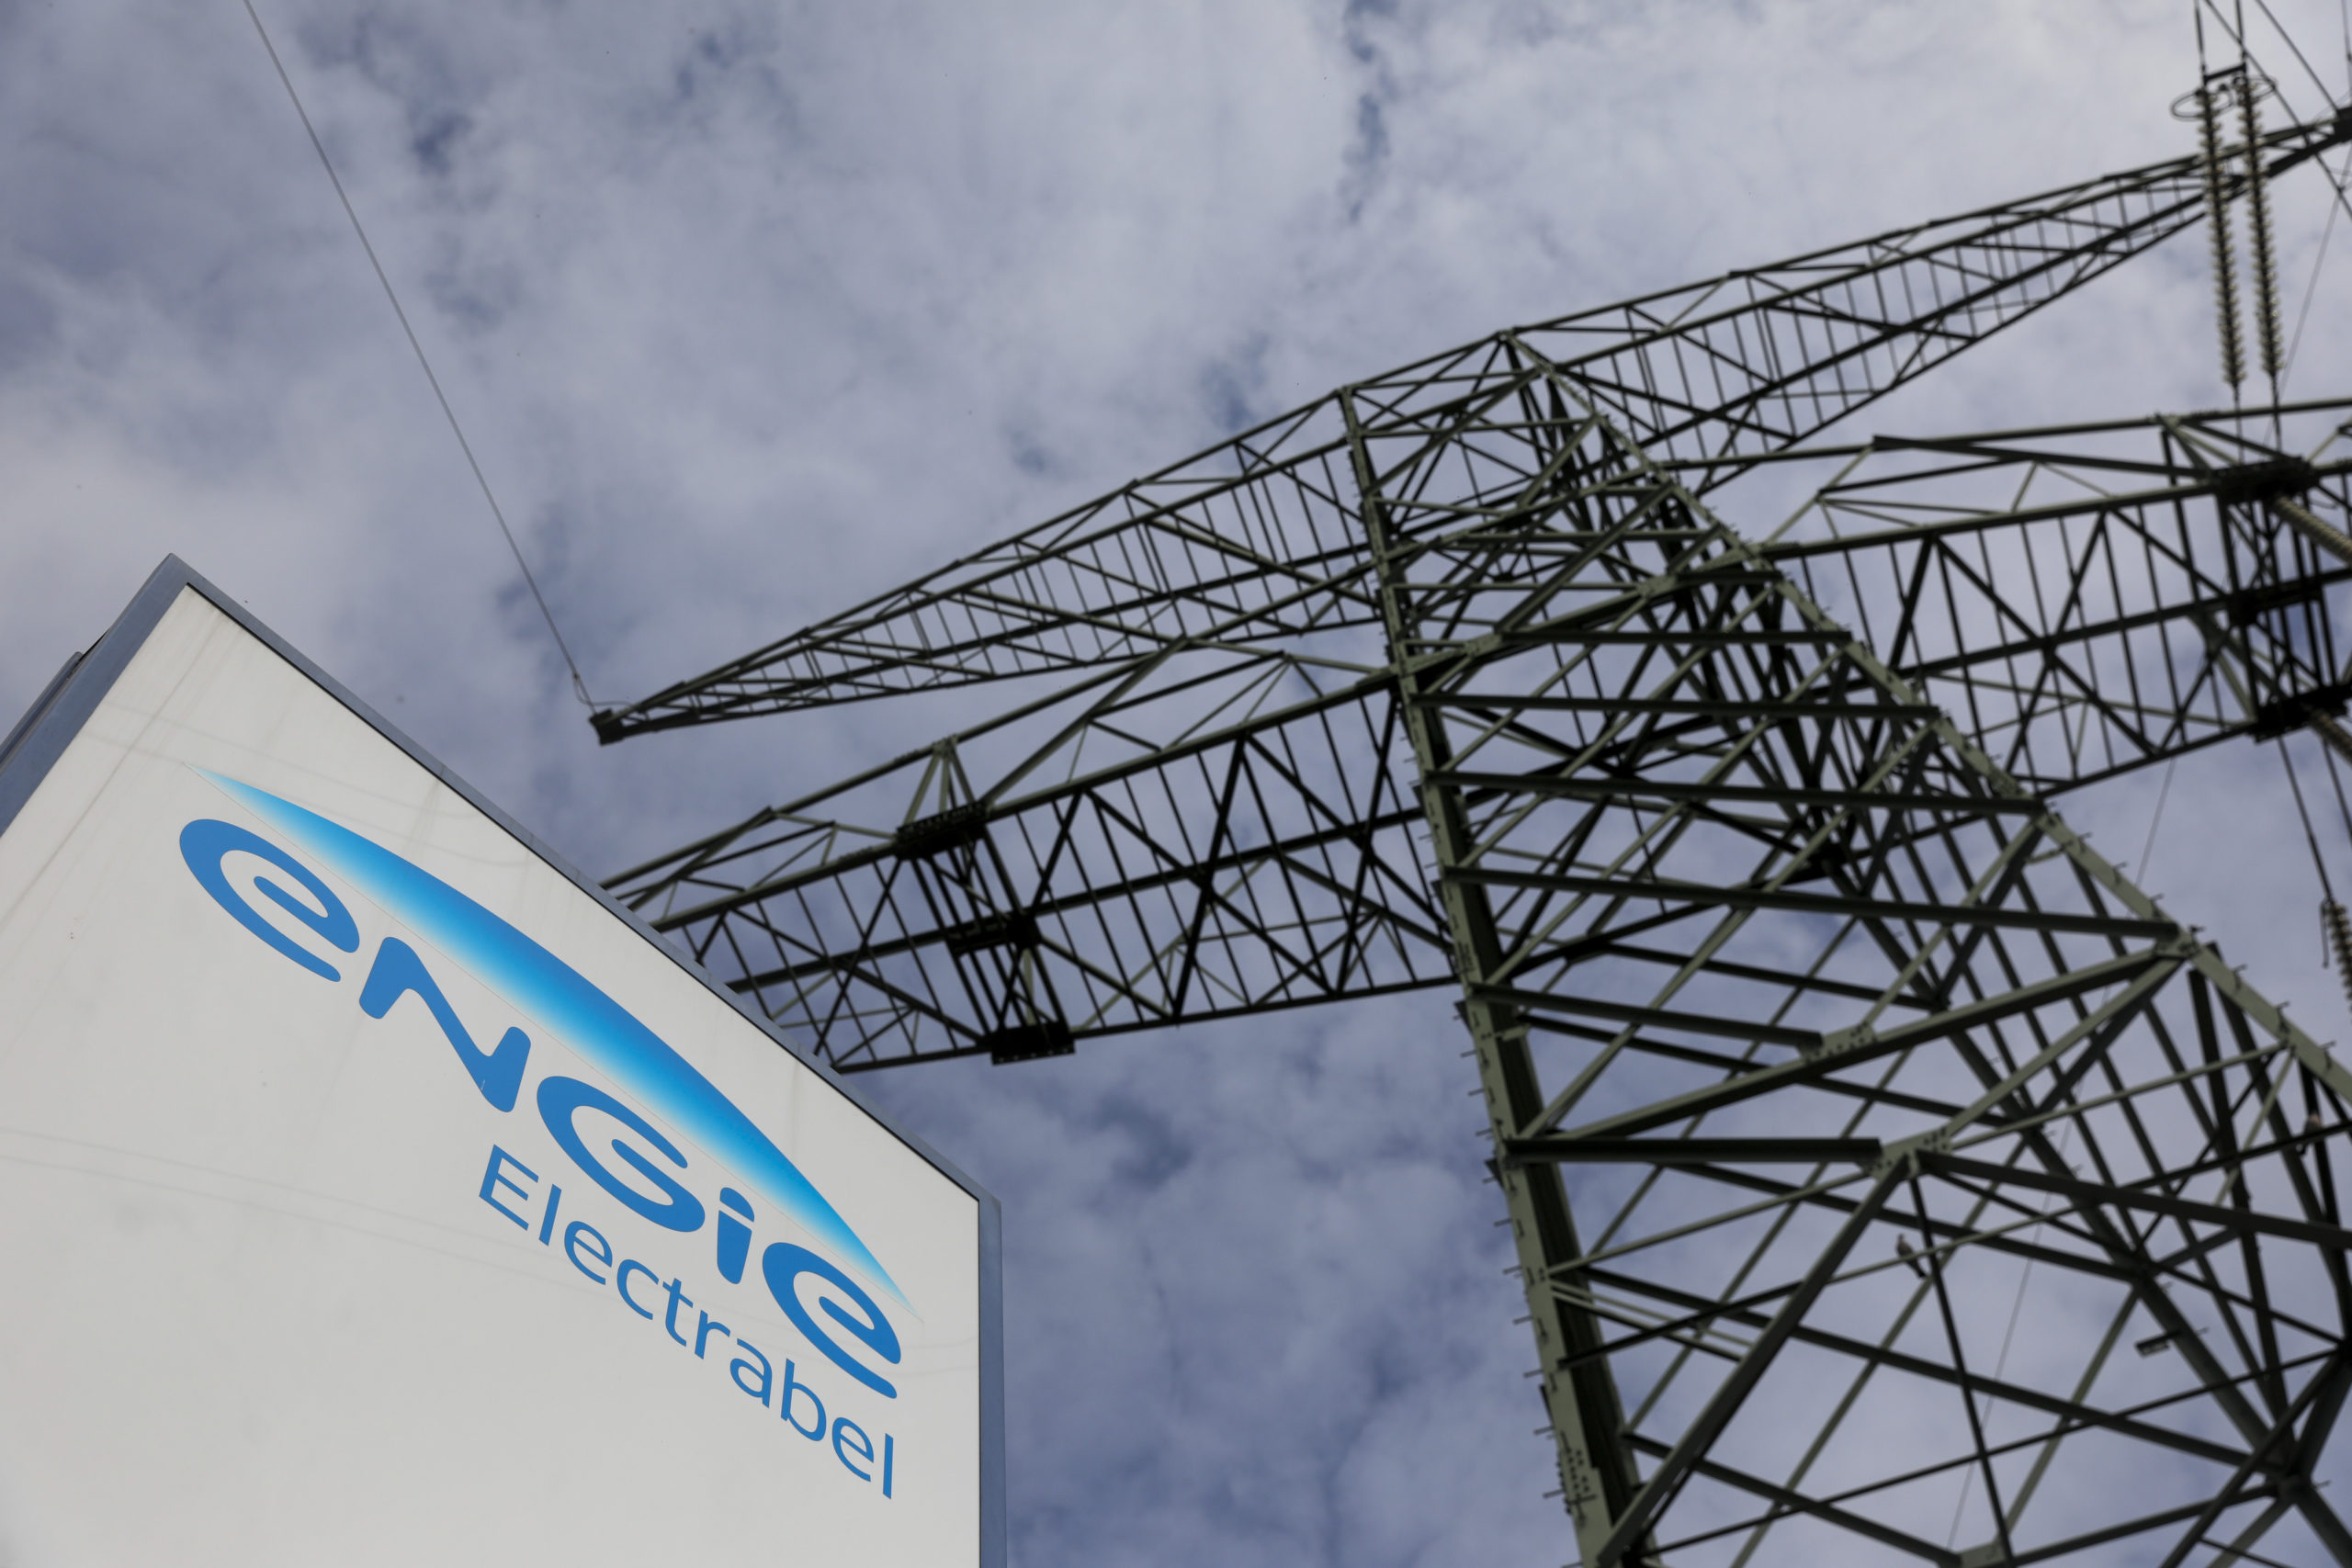 Engie gets subsidies for gas power plants in Vilvoorde and Awirs